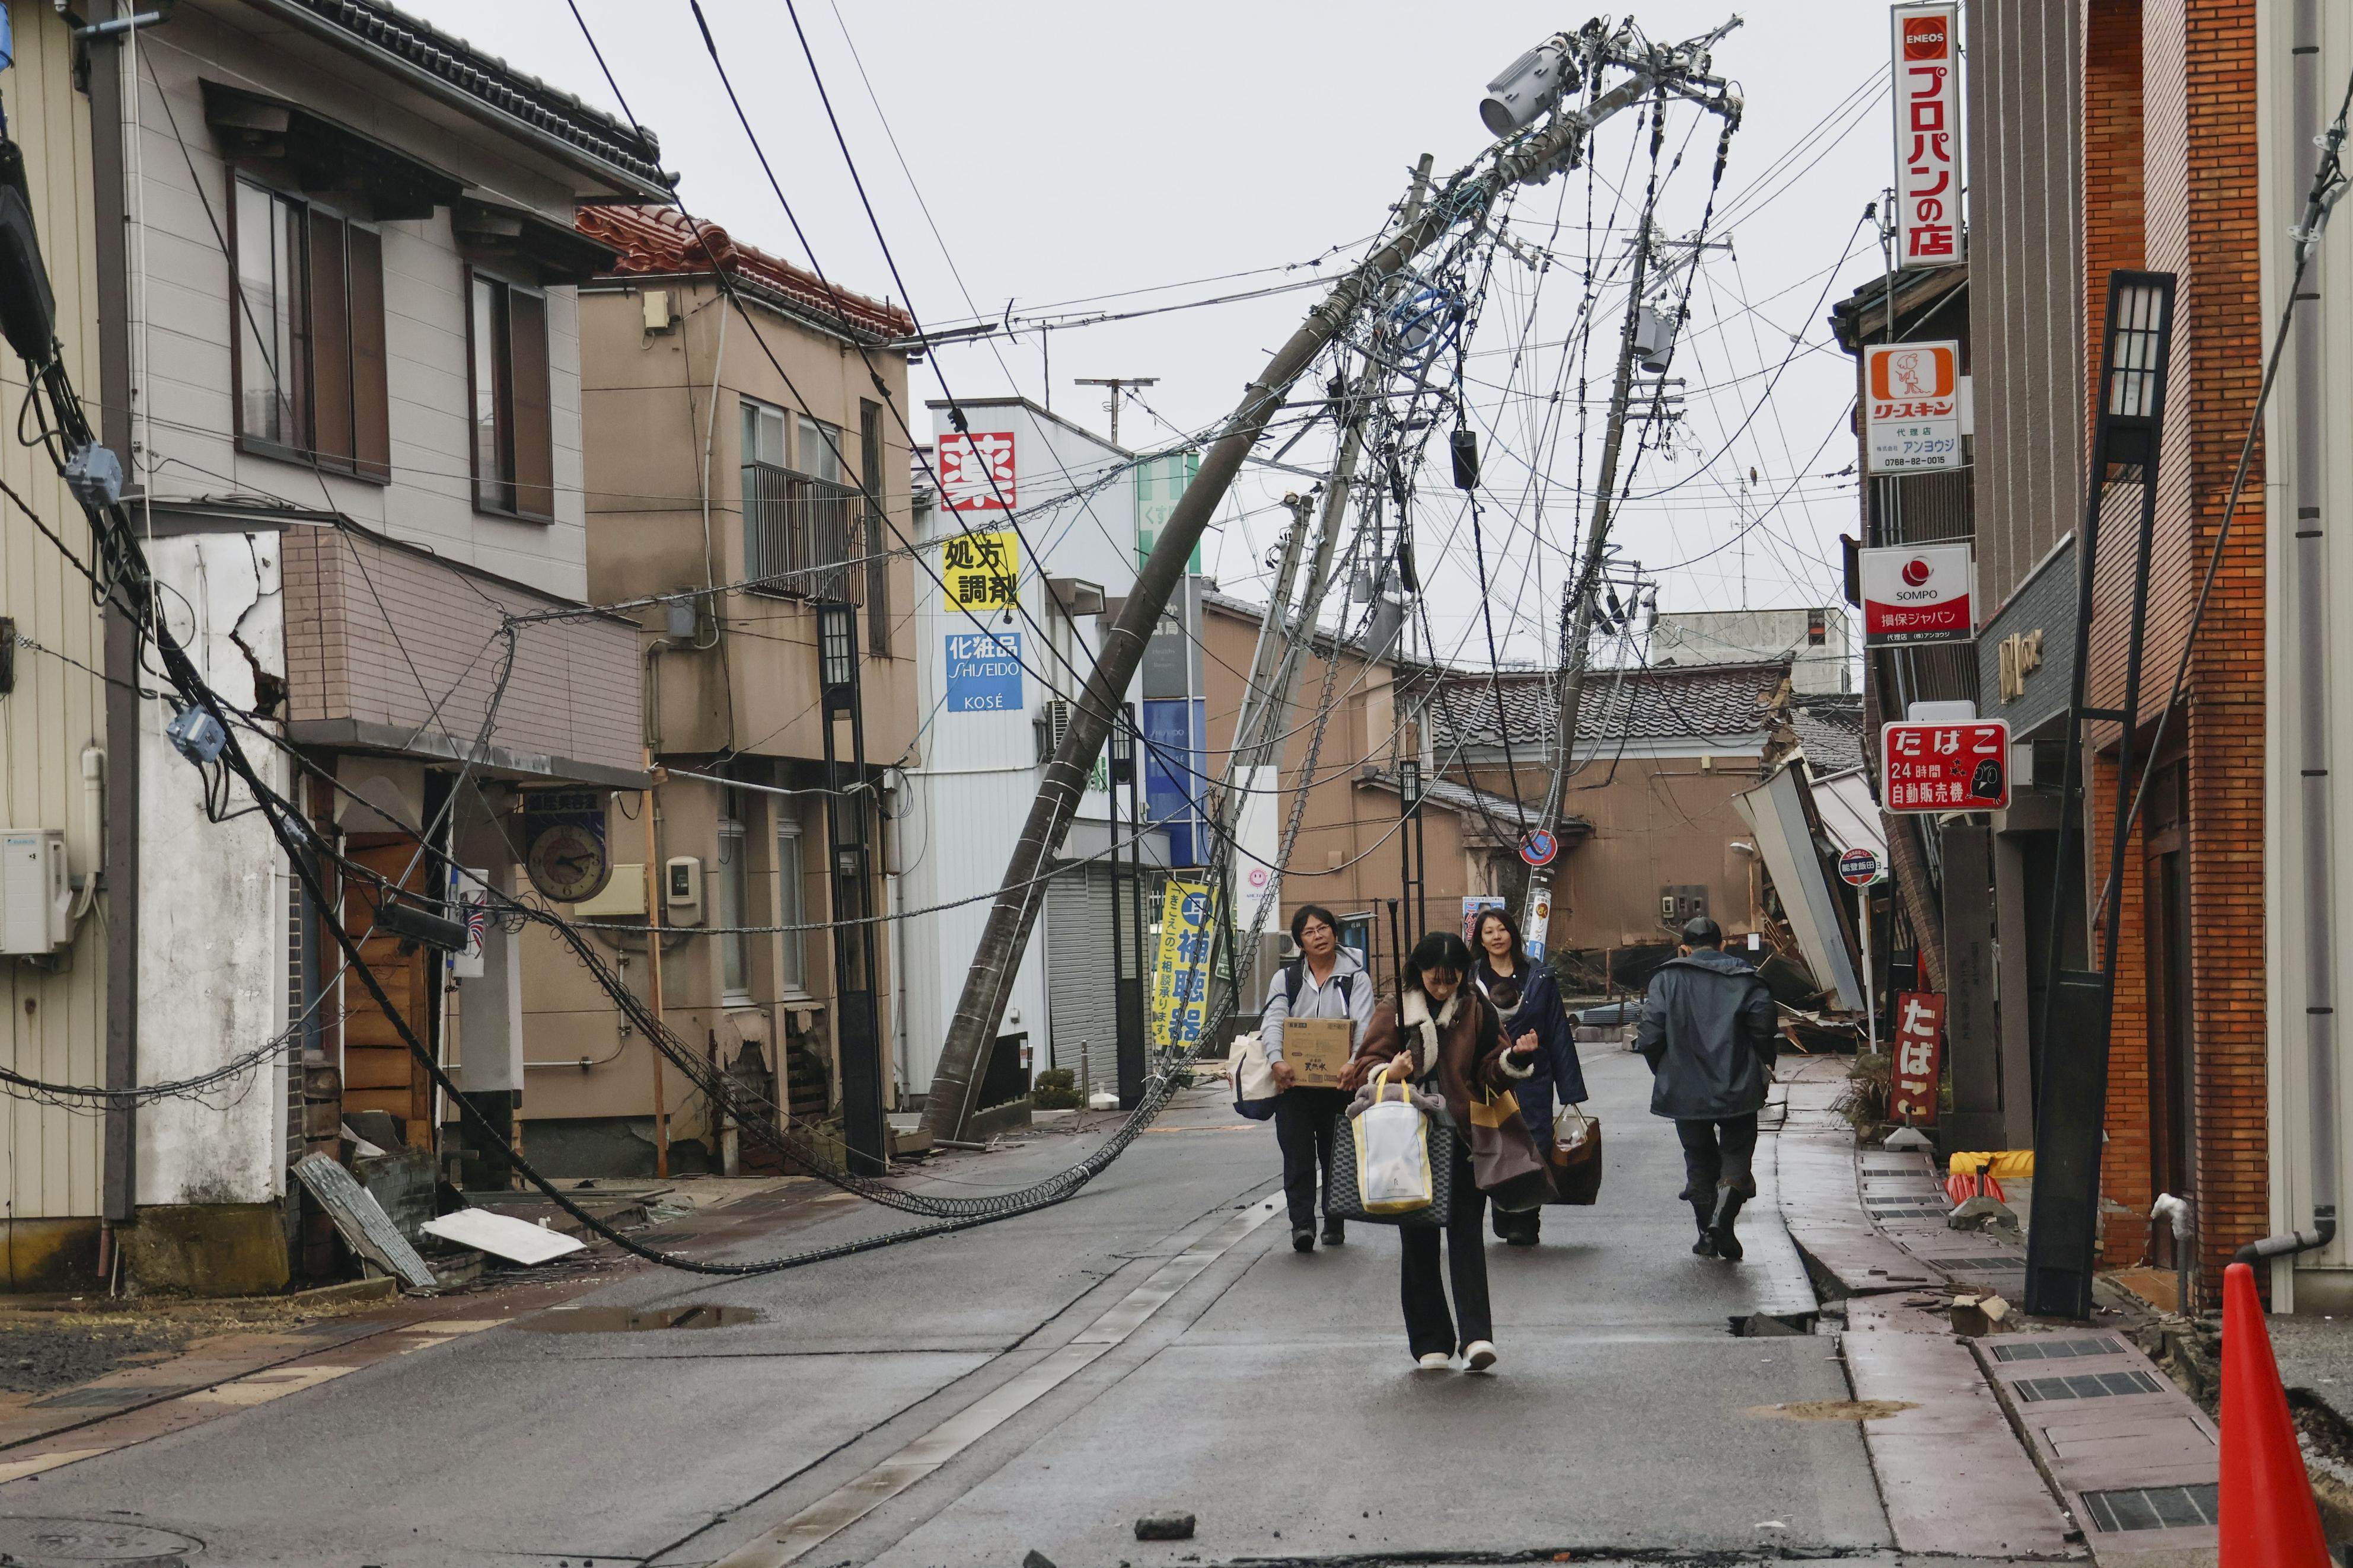 People walk in Suzu in Ishikawa Prefecture that was affected by a strong earthquake on January 1. Photo: Kyodo